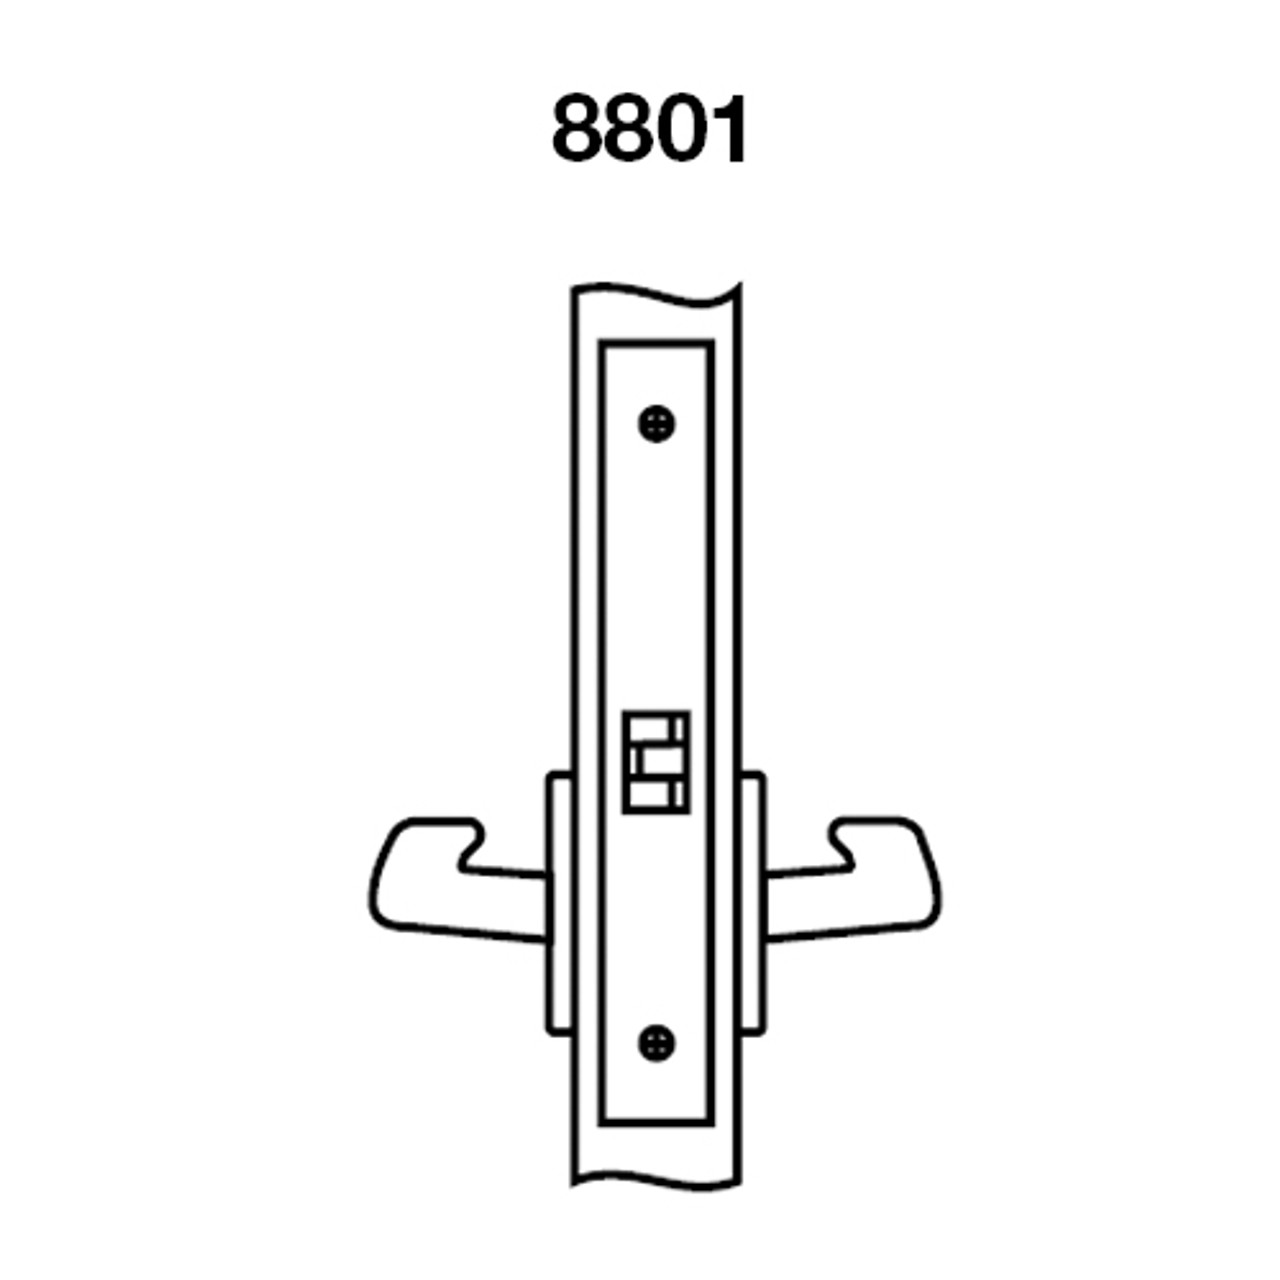 PBR8801FL-626 Yale 8800FL Series Non-Keyed Mortise Passage Locks with Pacific Beach Lever in Satin Chrome